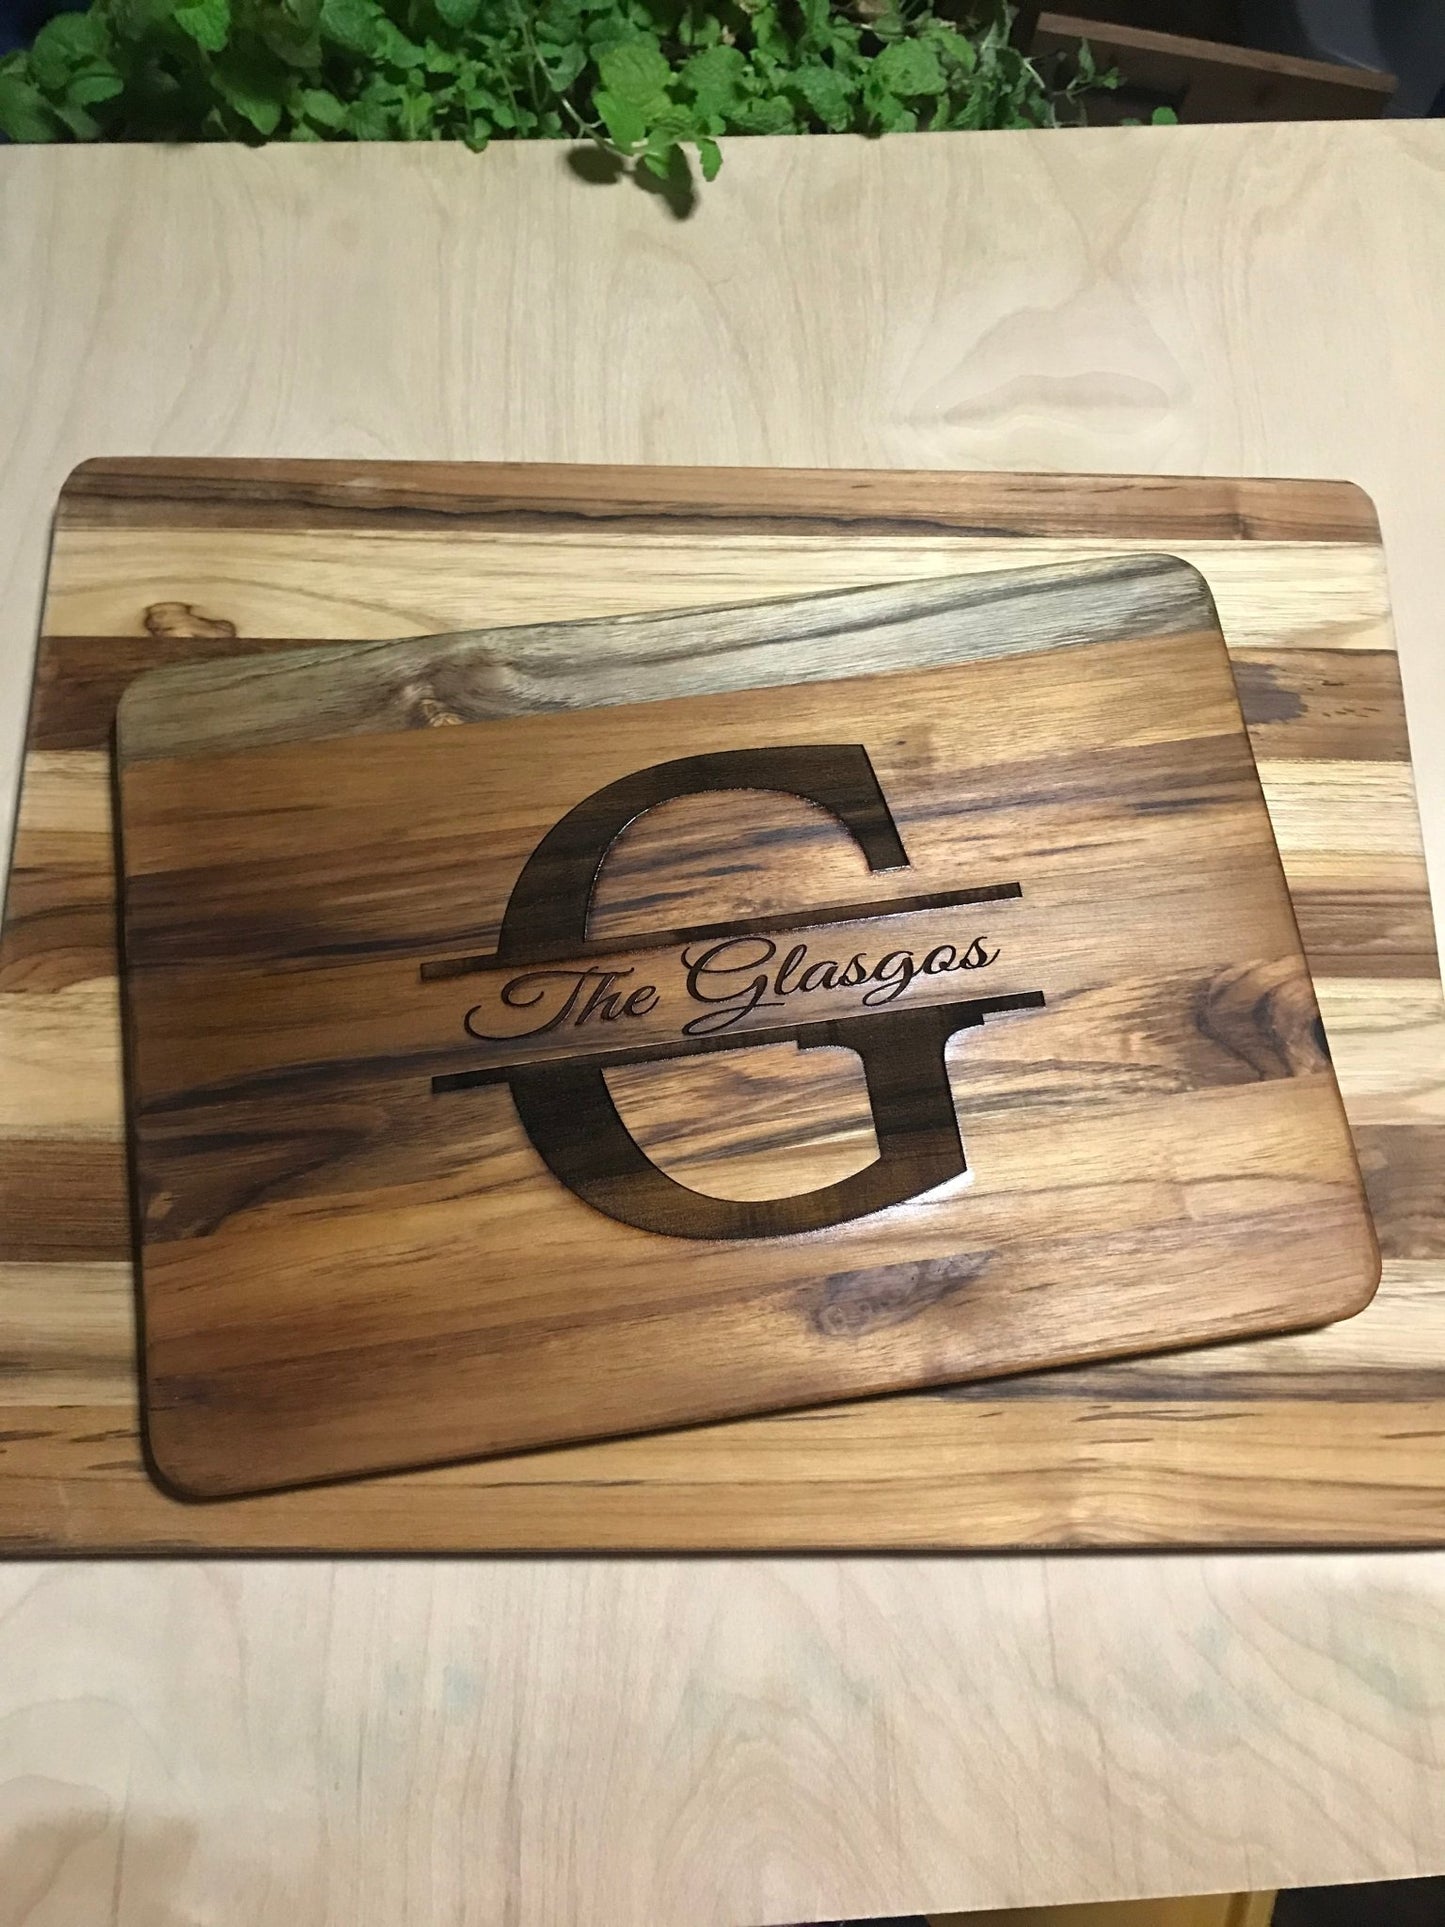 Cutting Boards - Bring your own cutting board to engrave - Gas City Creative Design & Event https://www.facebook.com/gascitycreative/